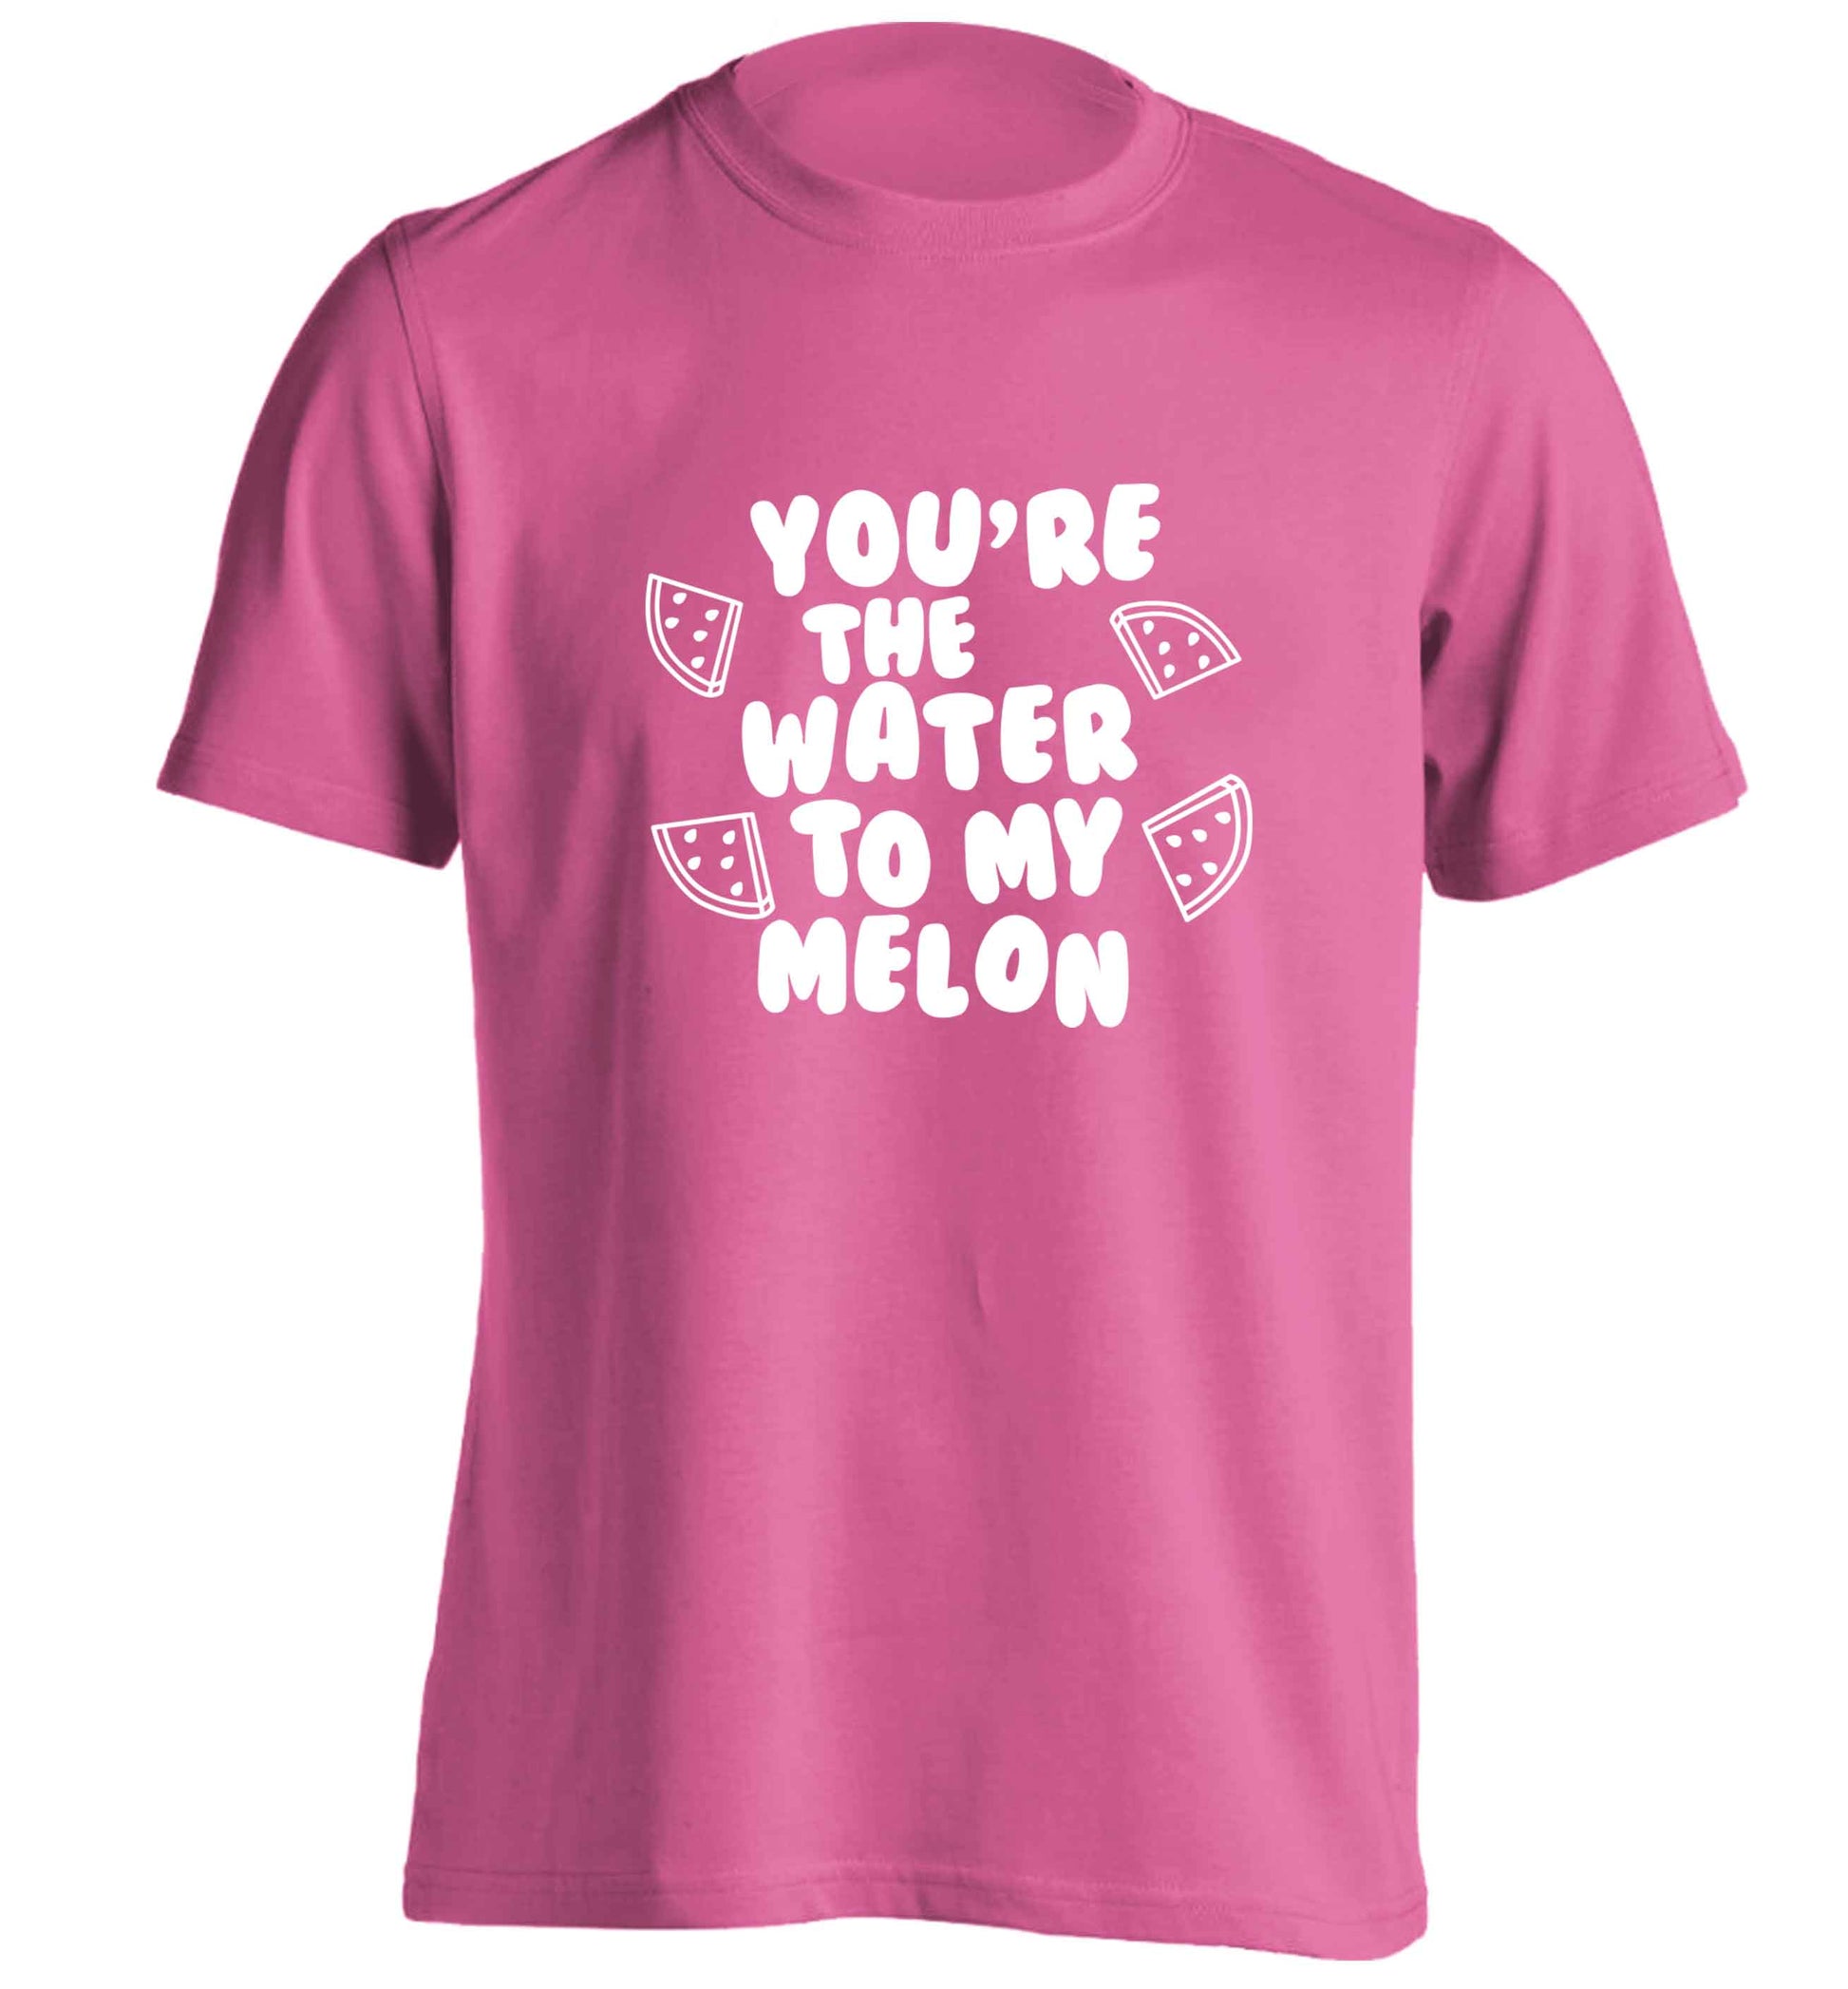 You're the water to my melon adults unisex pink Tshirt 2XL